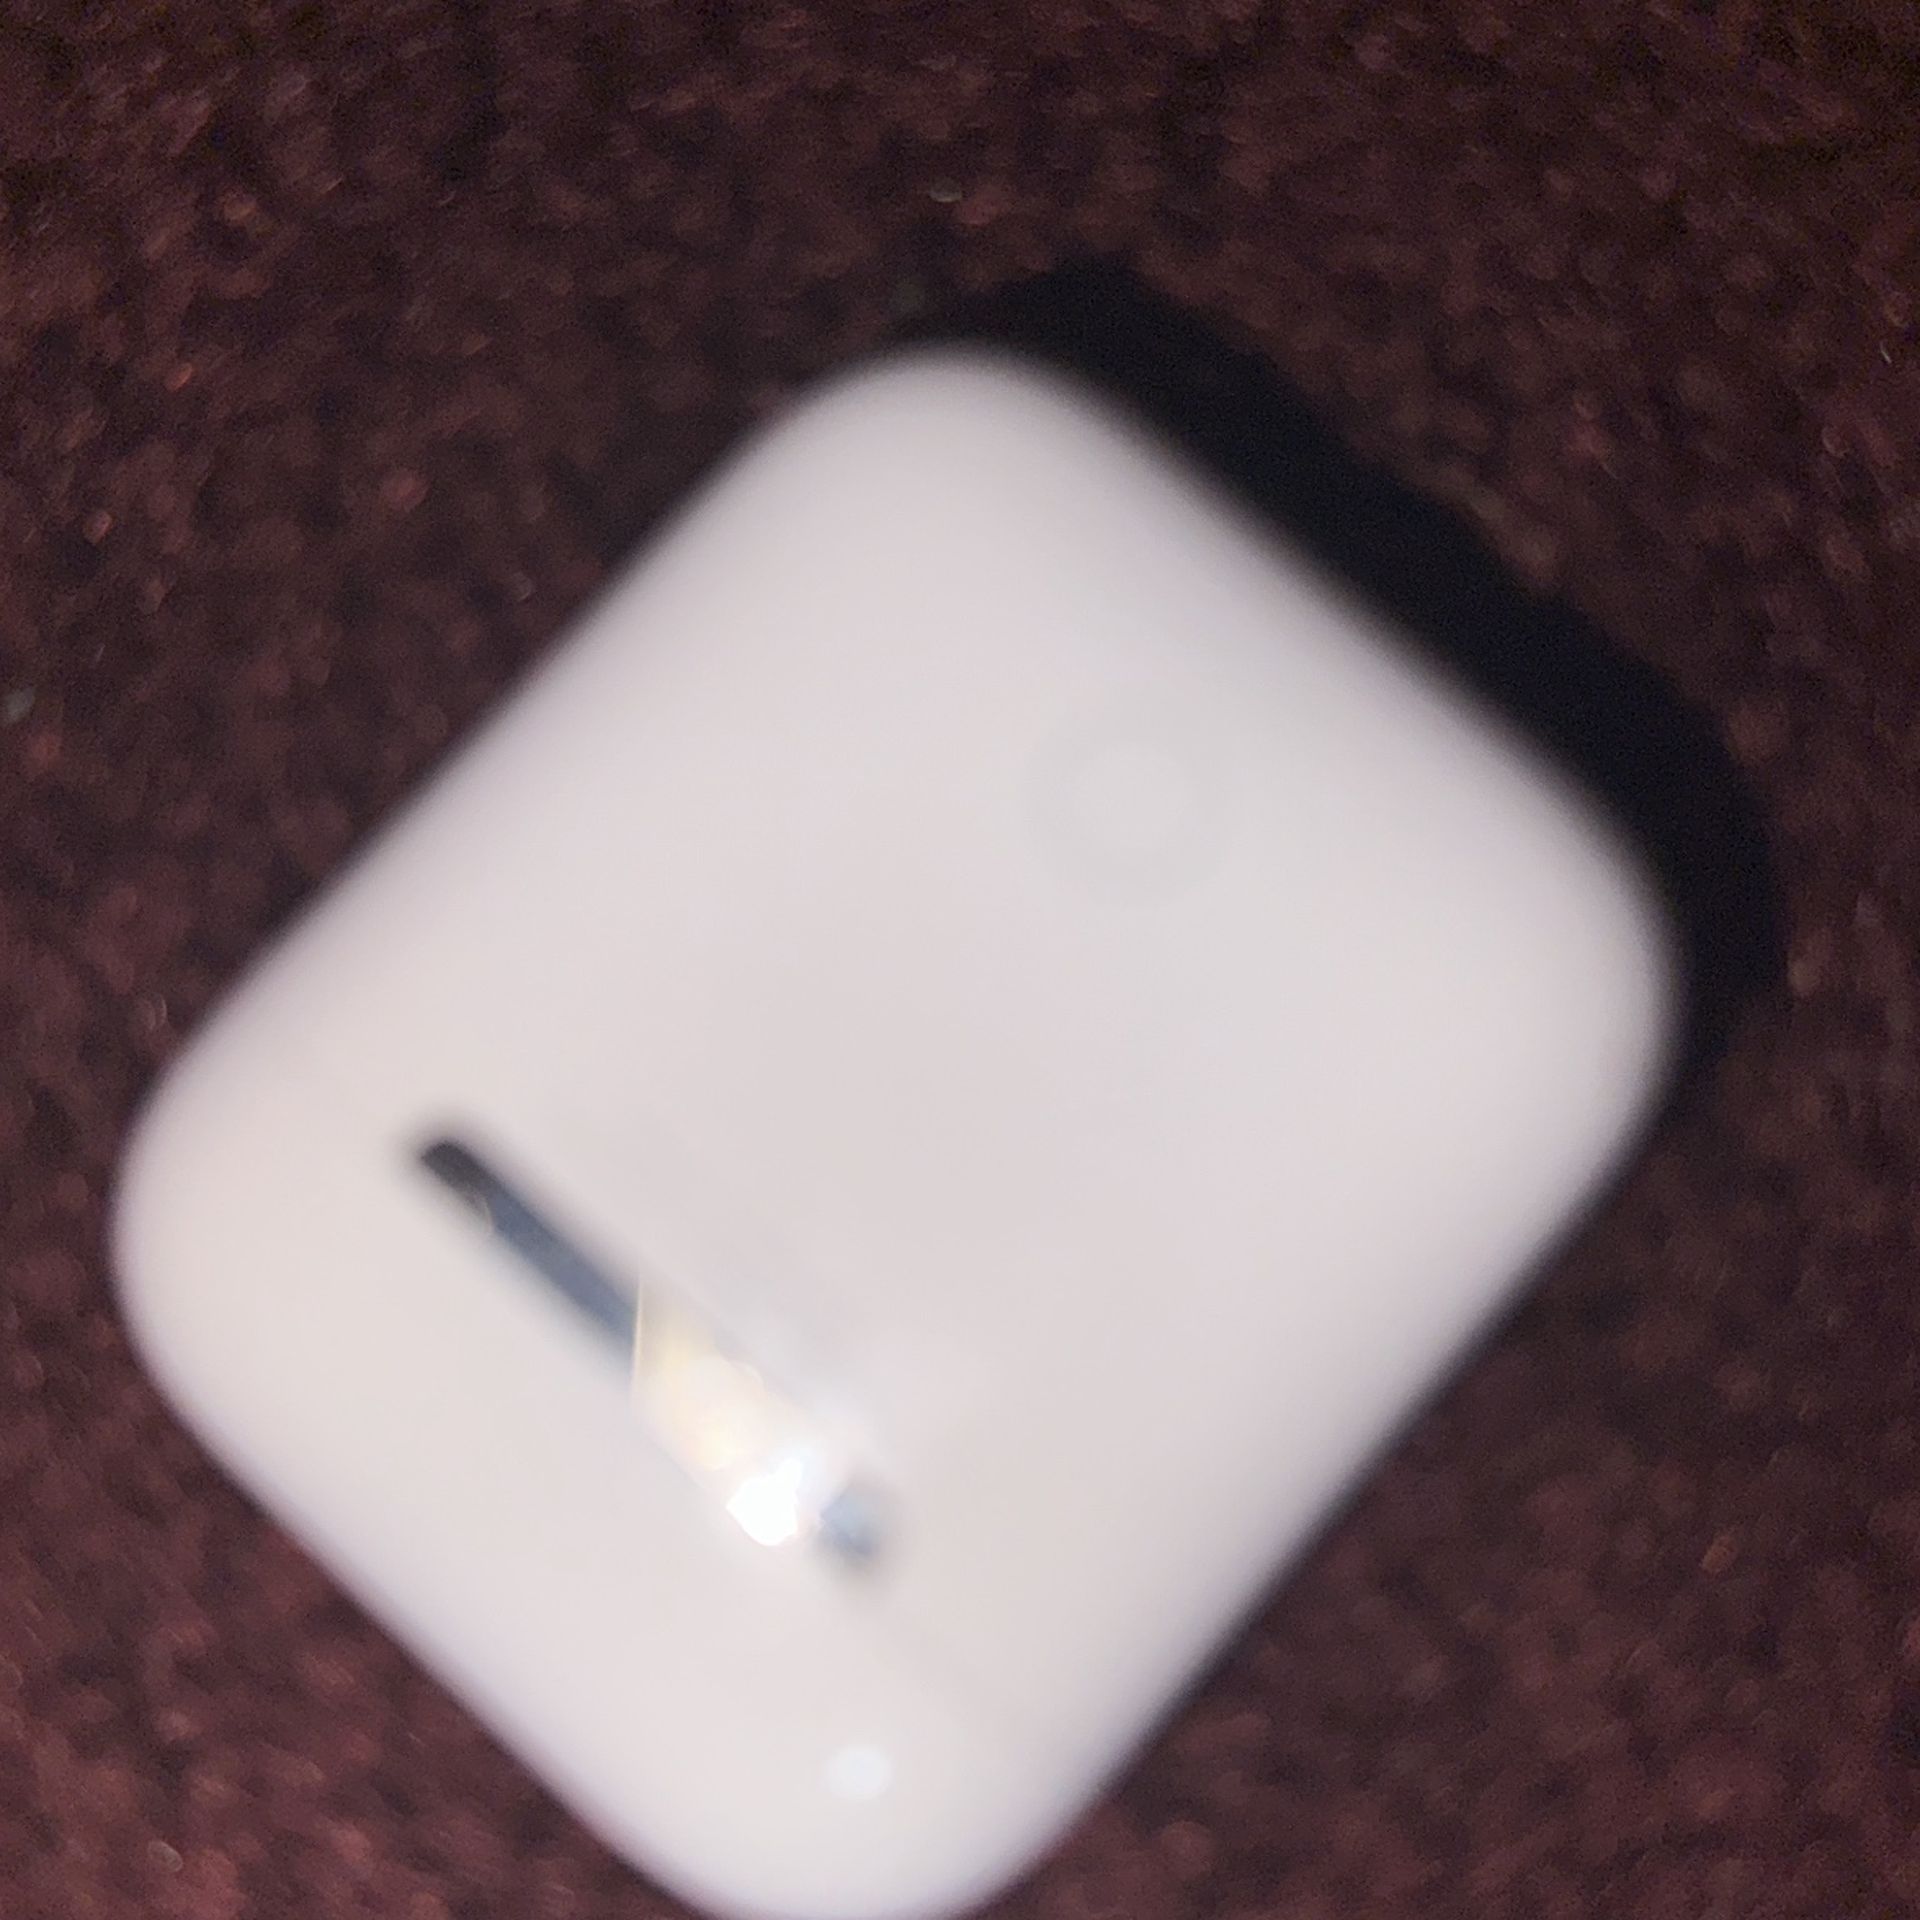 Airpods FIRST COME FIRST SERVE BRAND NEW, NEW CONDITION 50-60$ come get it now!